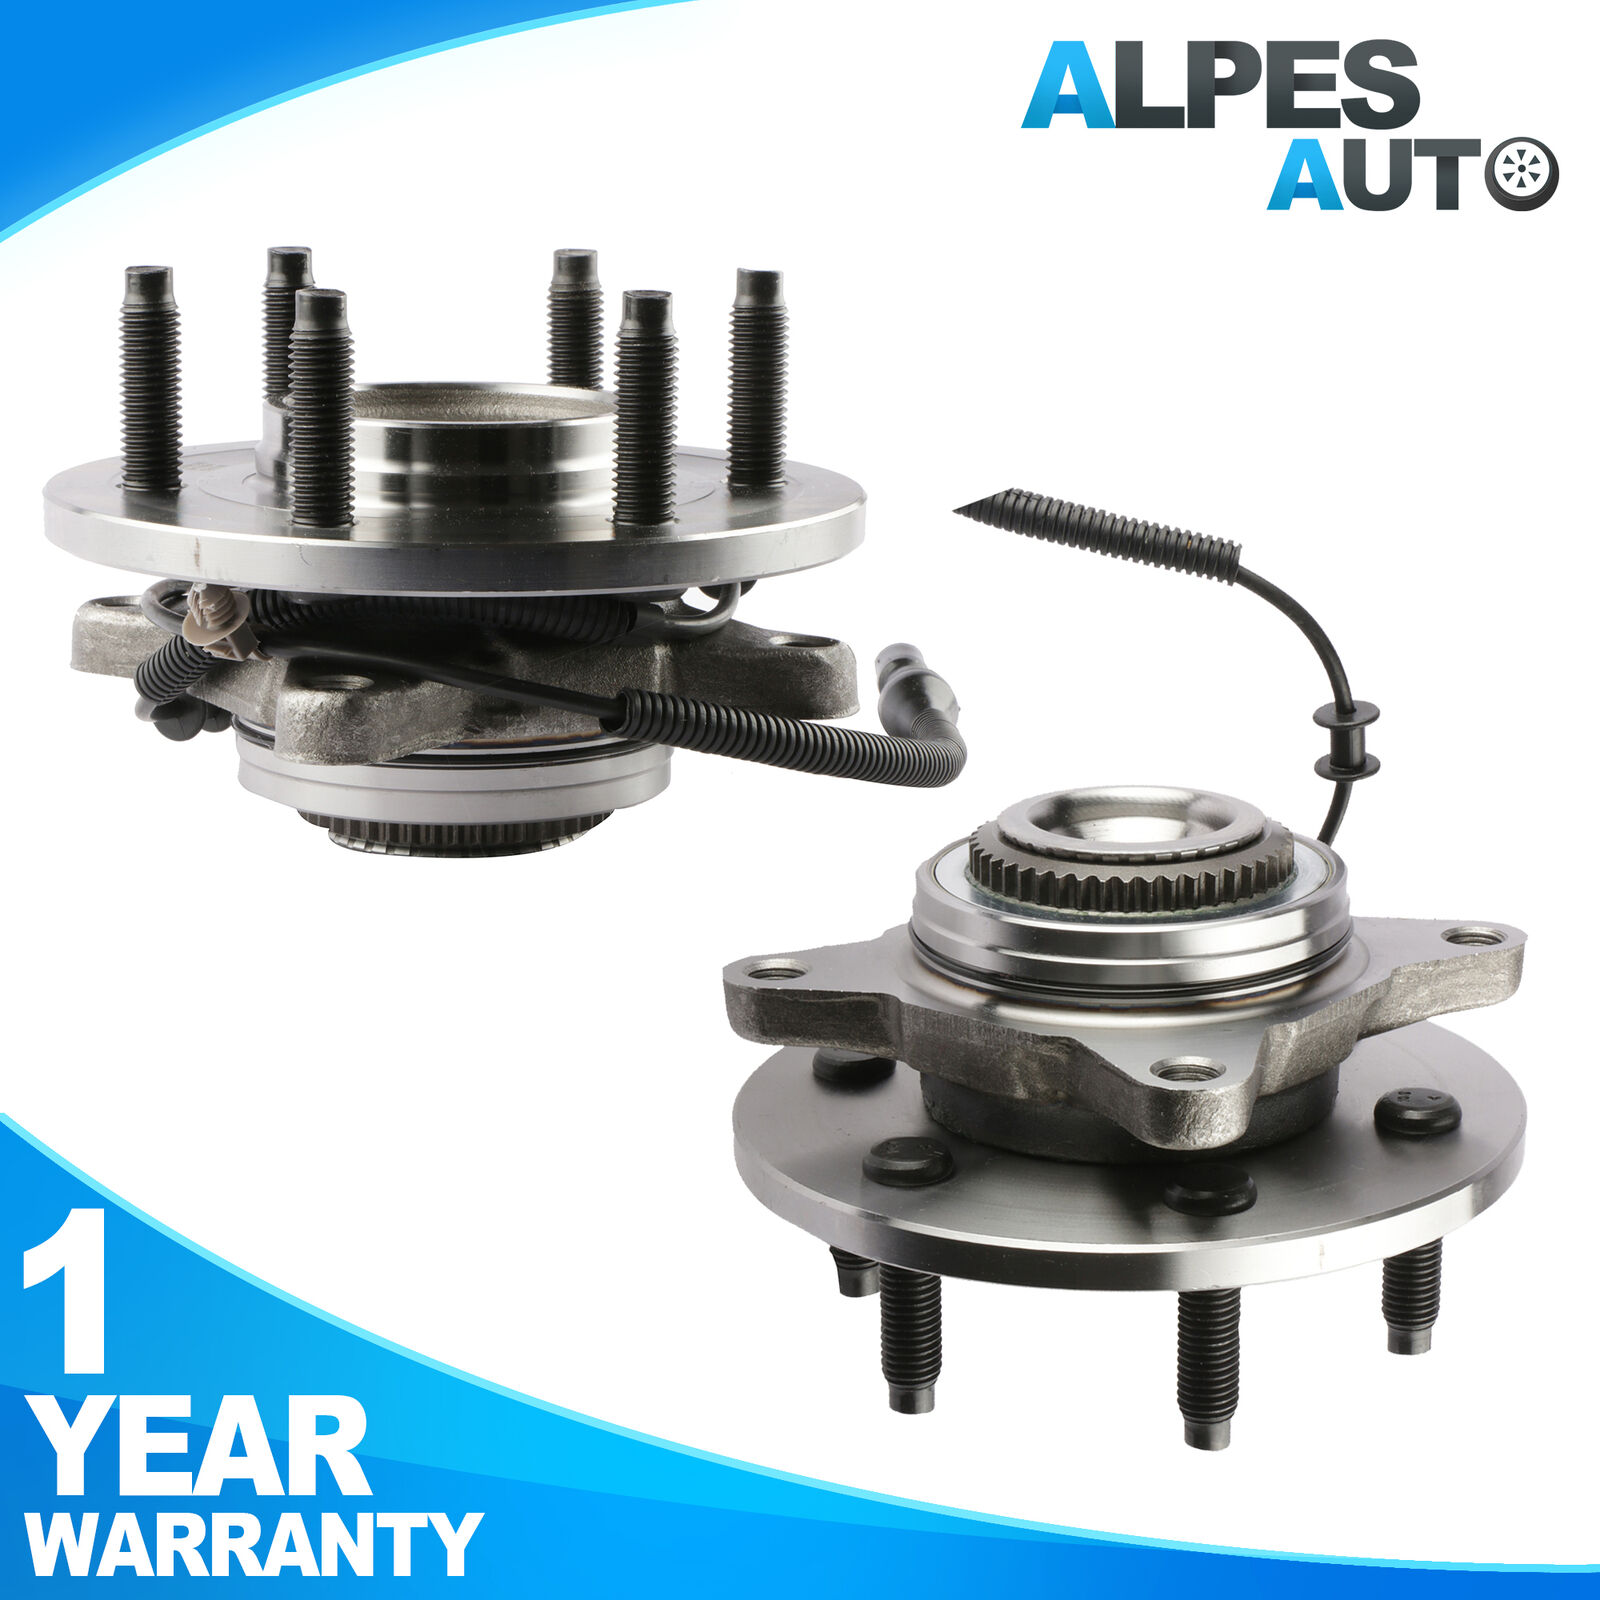 2X Front Wheel Hub Bearings 515079 For 2006-2008 Ford F-150 Lincoln Mark LT 4WD